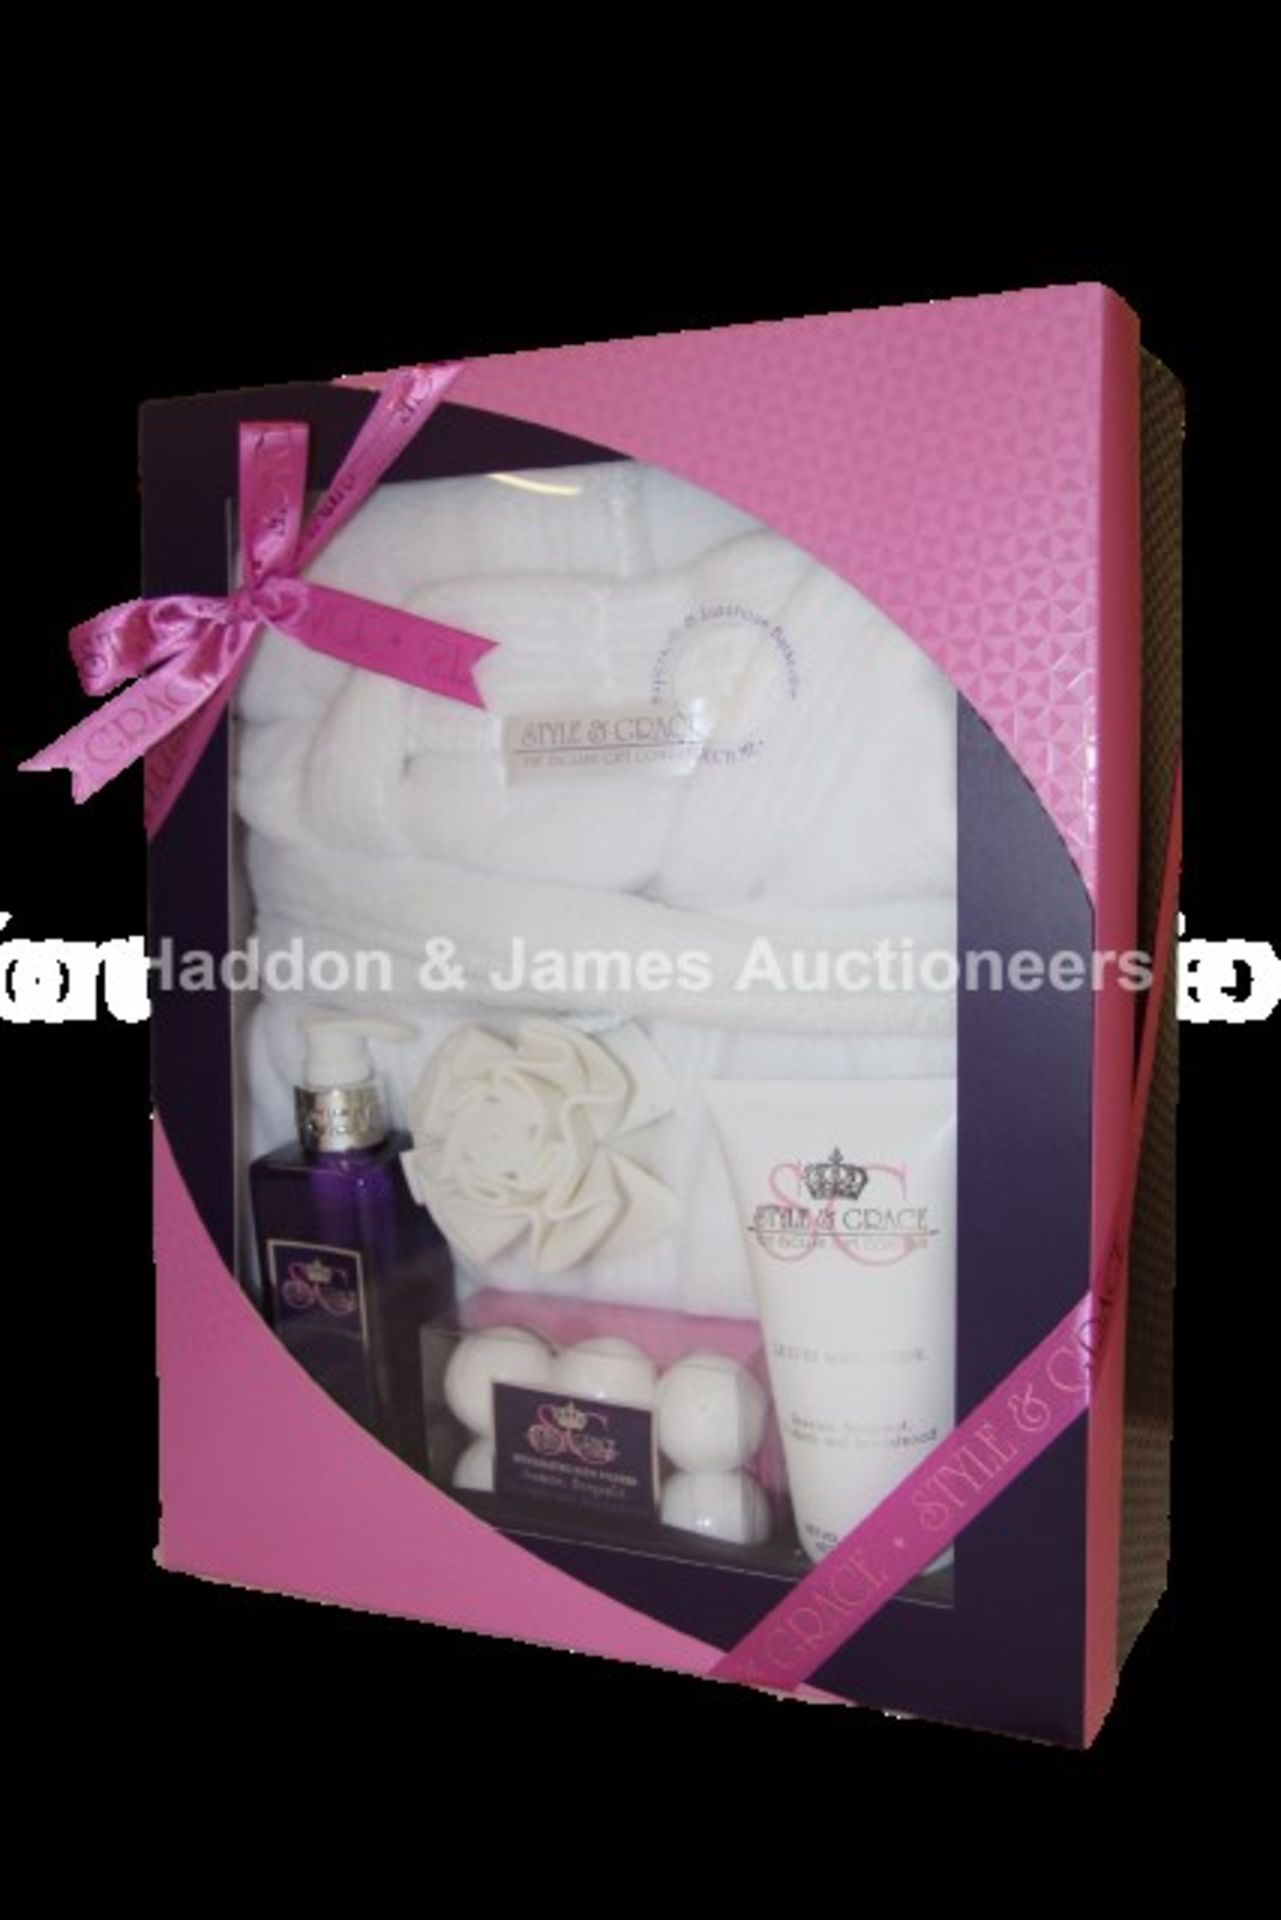 V Brand New Style & Grace Deluxe Robe Gift Set Including Bath Fizzers, Body Lotion And Body Wash X 2